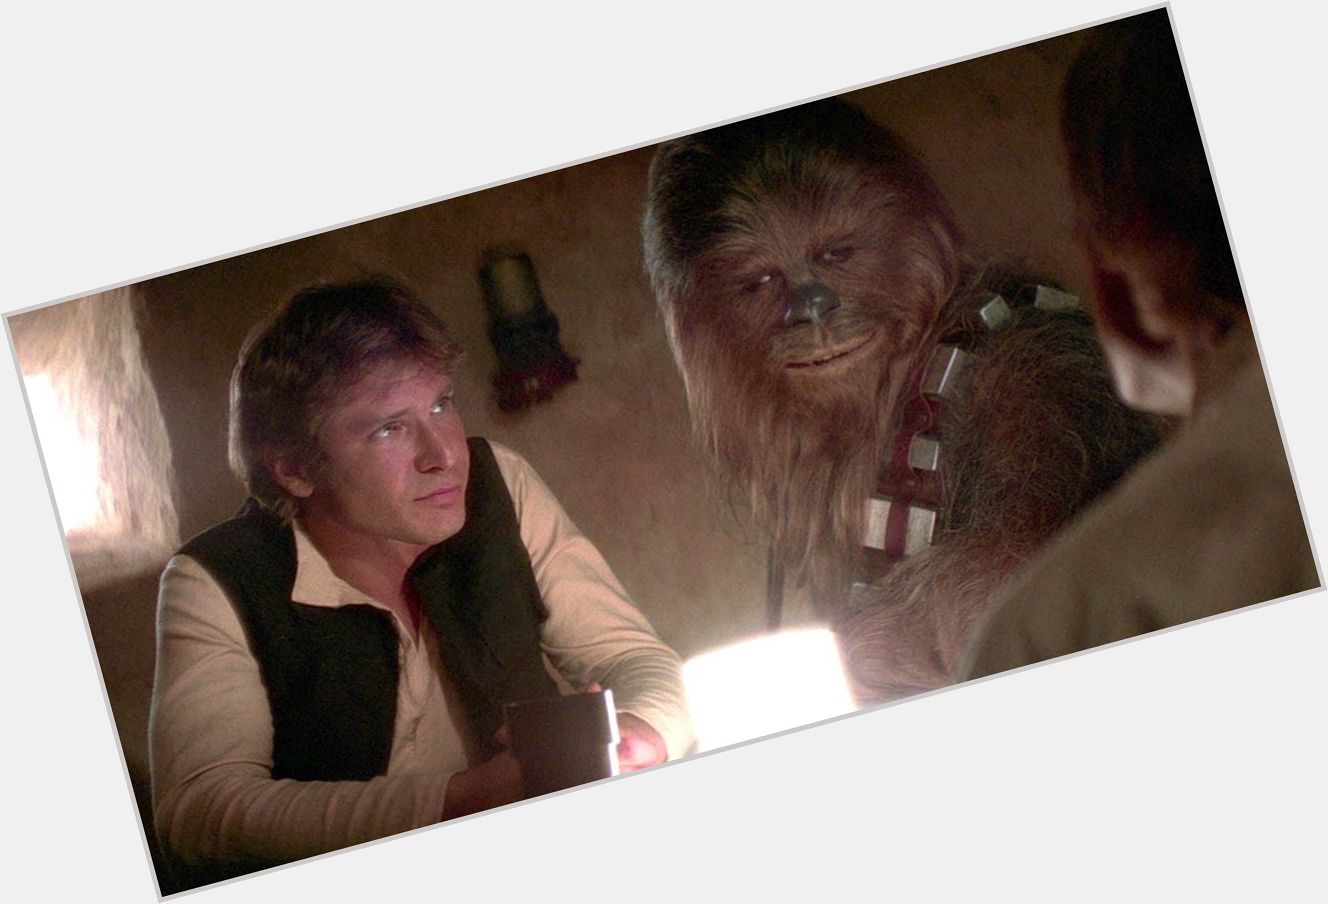 Chewbacca Actor Wishes Star Wars Co-Pilot Harrison Ford a Happy Birthday
 